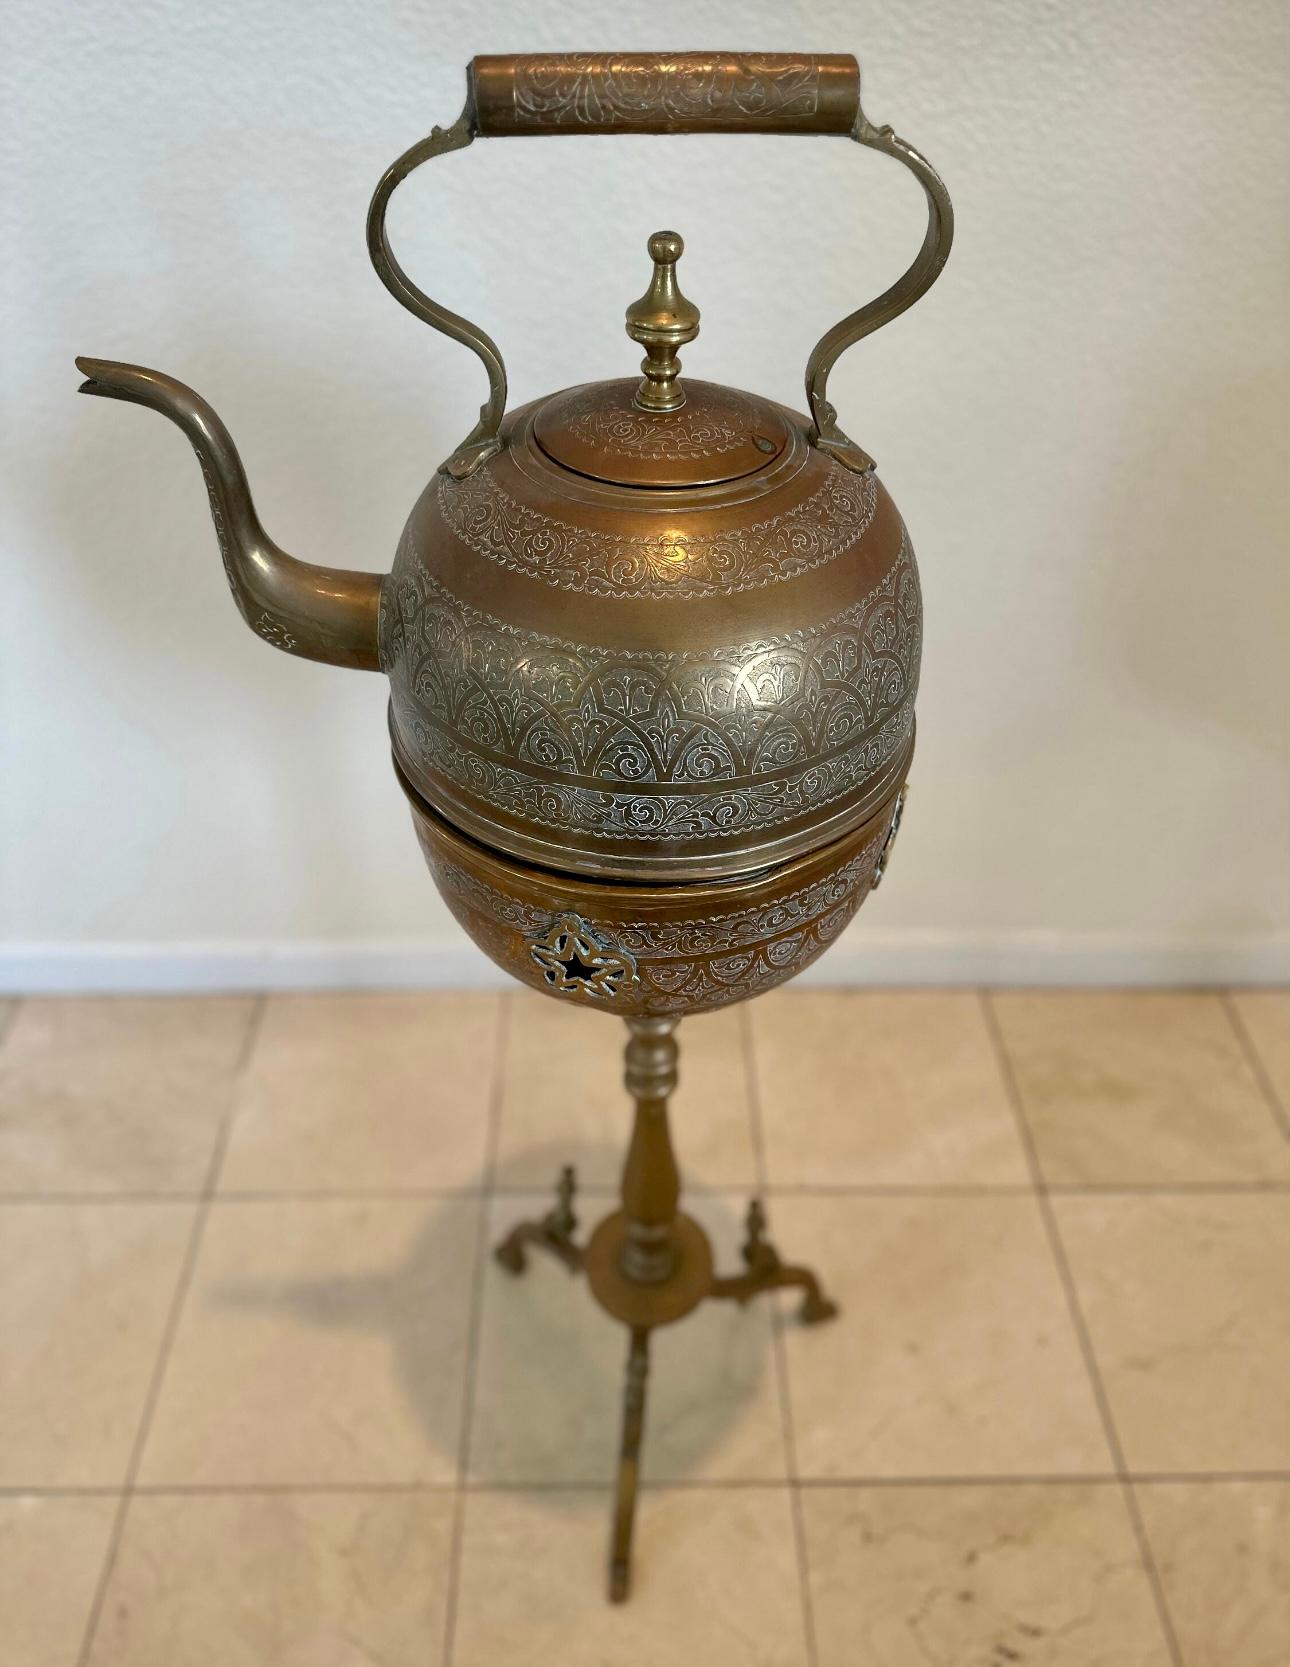 Hand crafted Moroccan antique brass tea kettle pot with warmer on stand., Museum quality, one of a kind antique artistically and delicately handcrafted tea water kettle
The base is made to hold the kettle hot by putting coal in it
Total Weight is